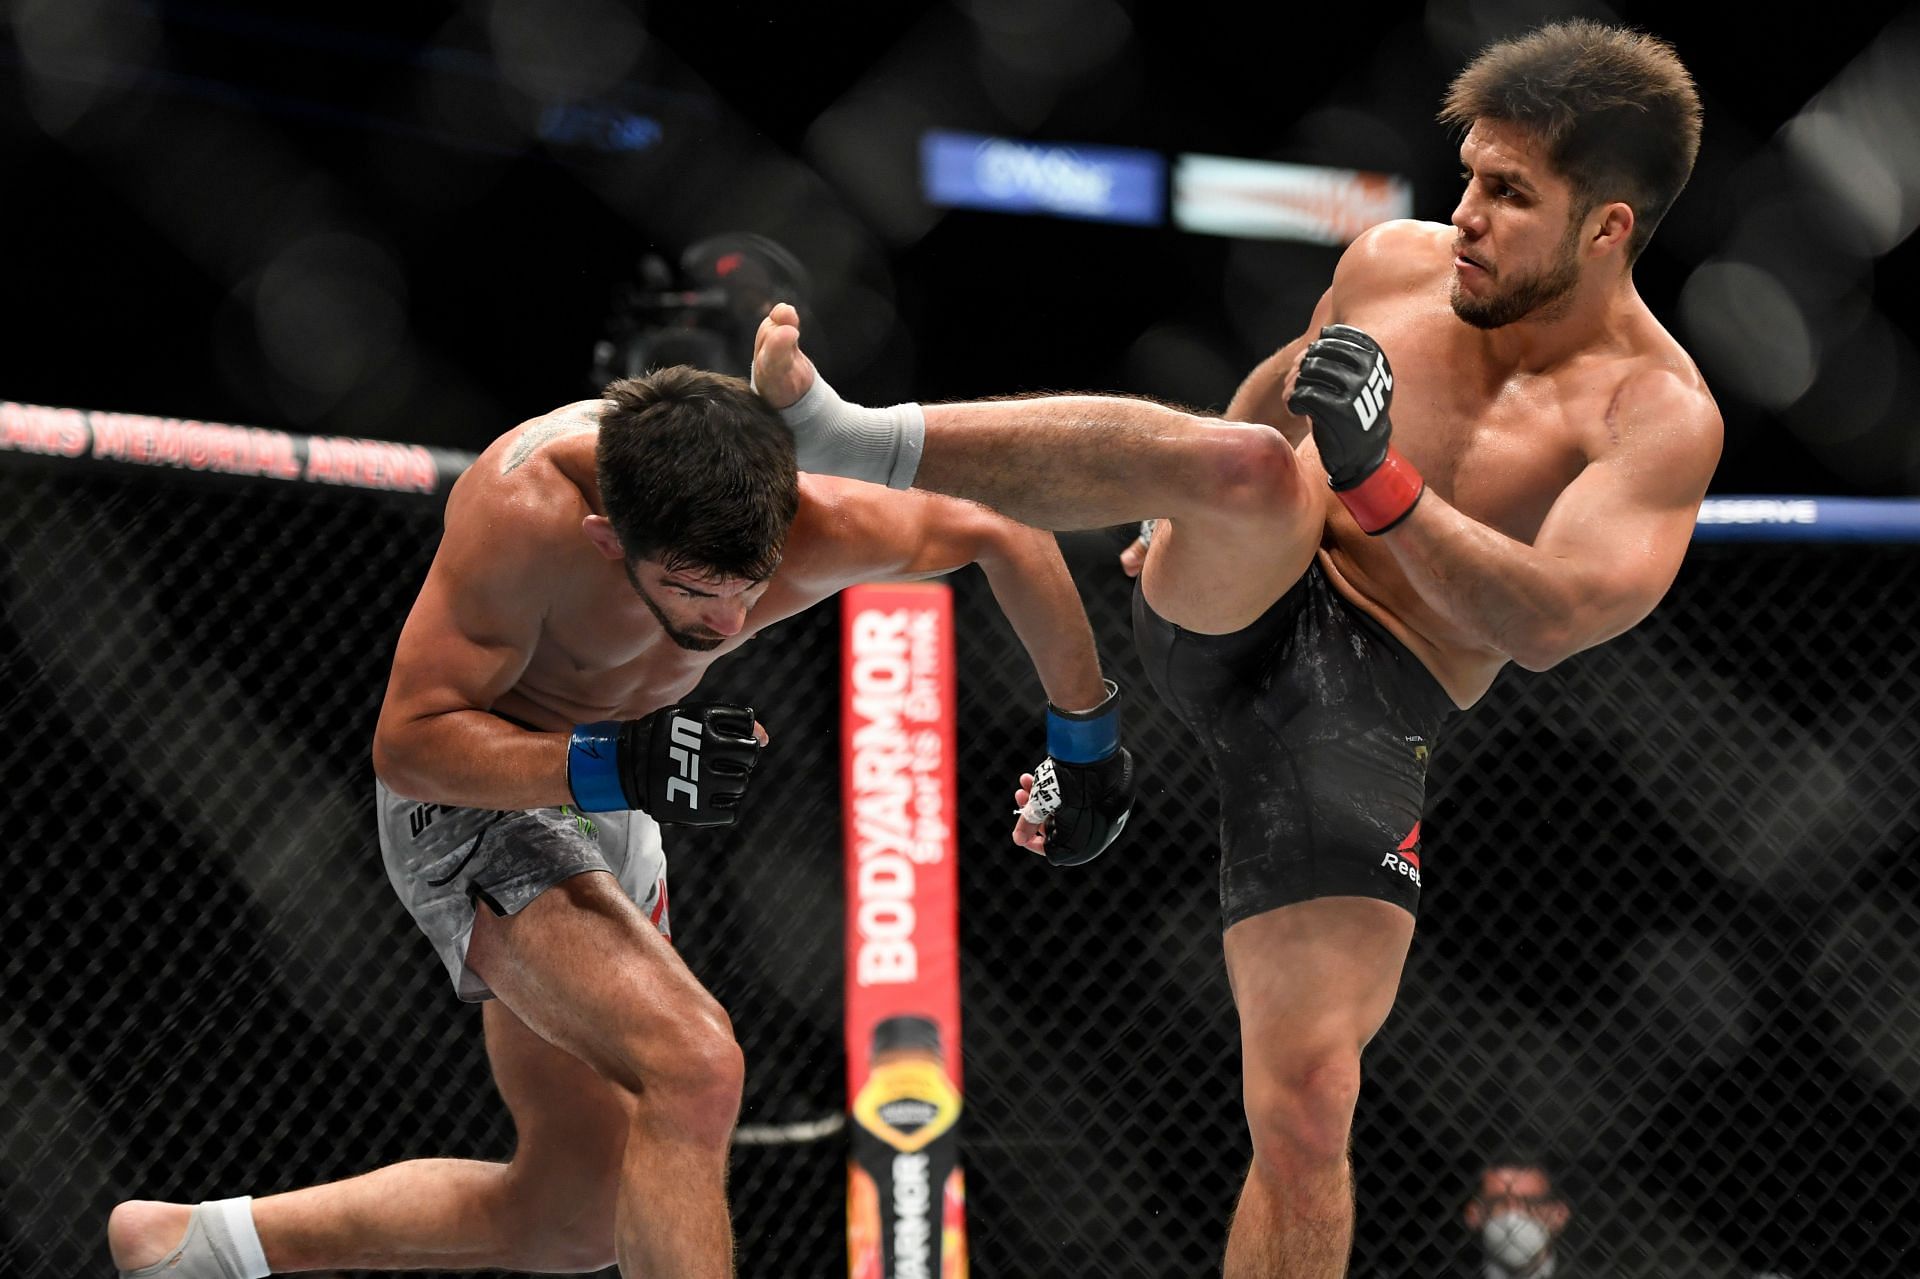 Henry Cejudo was the first man to stop Dominick Cruz with strikes